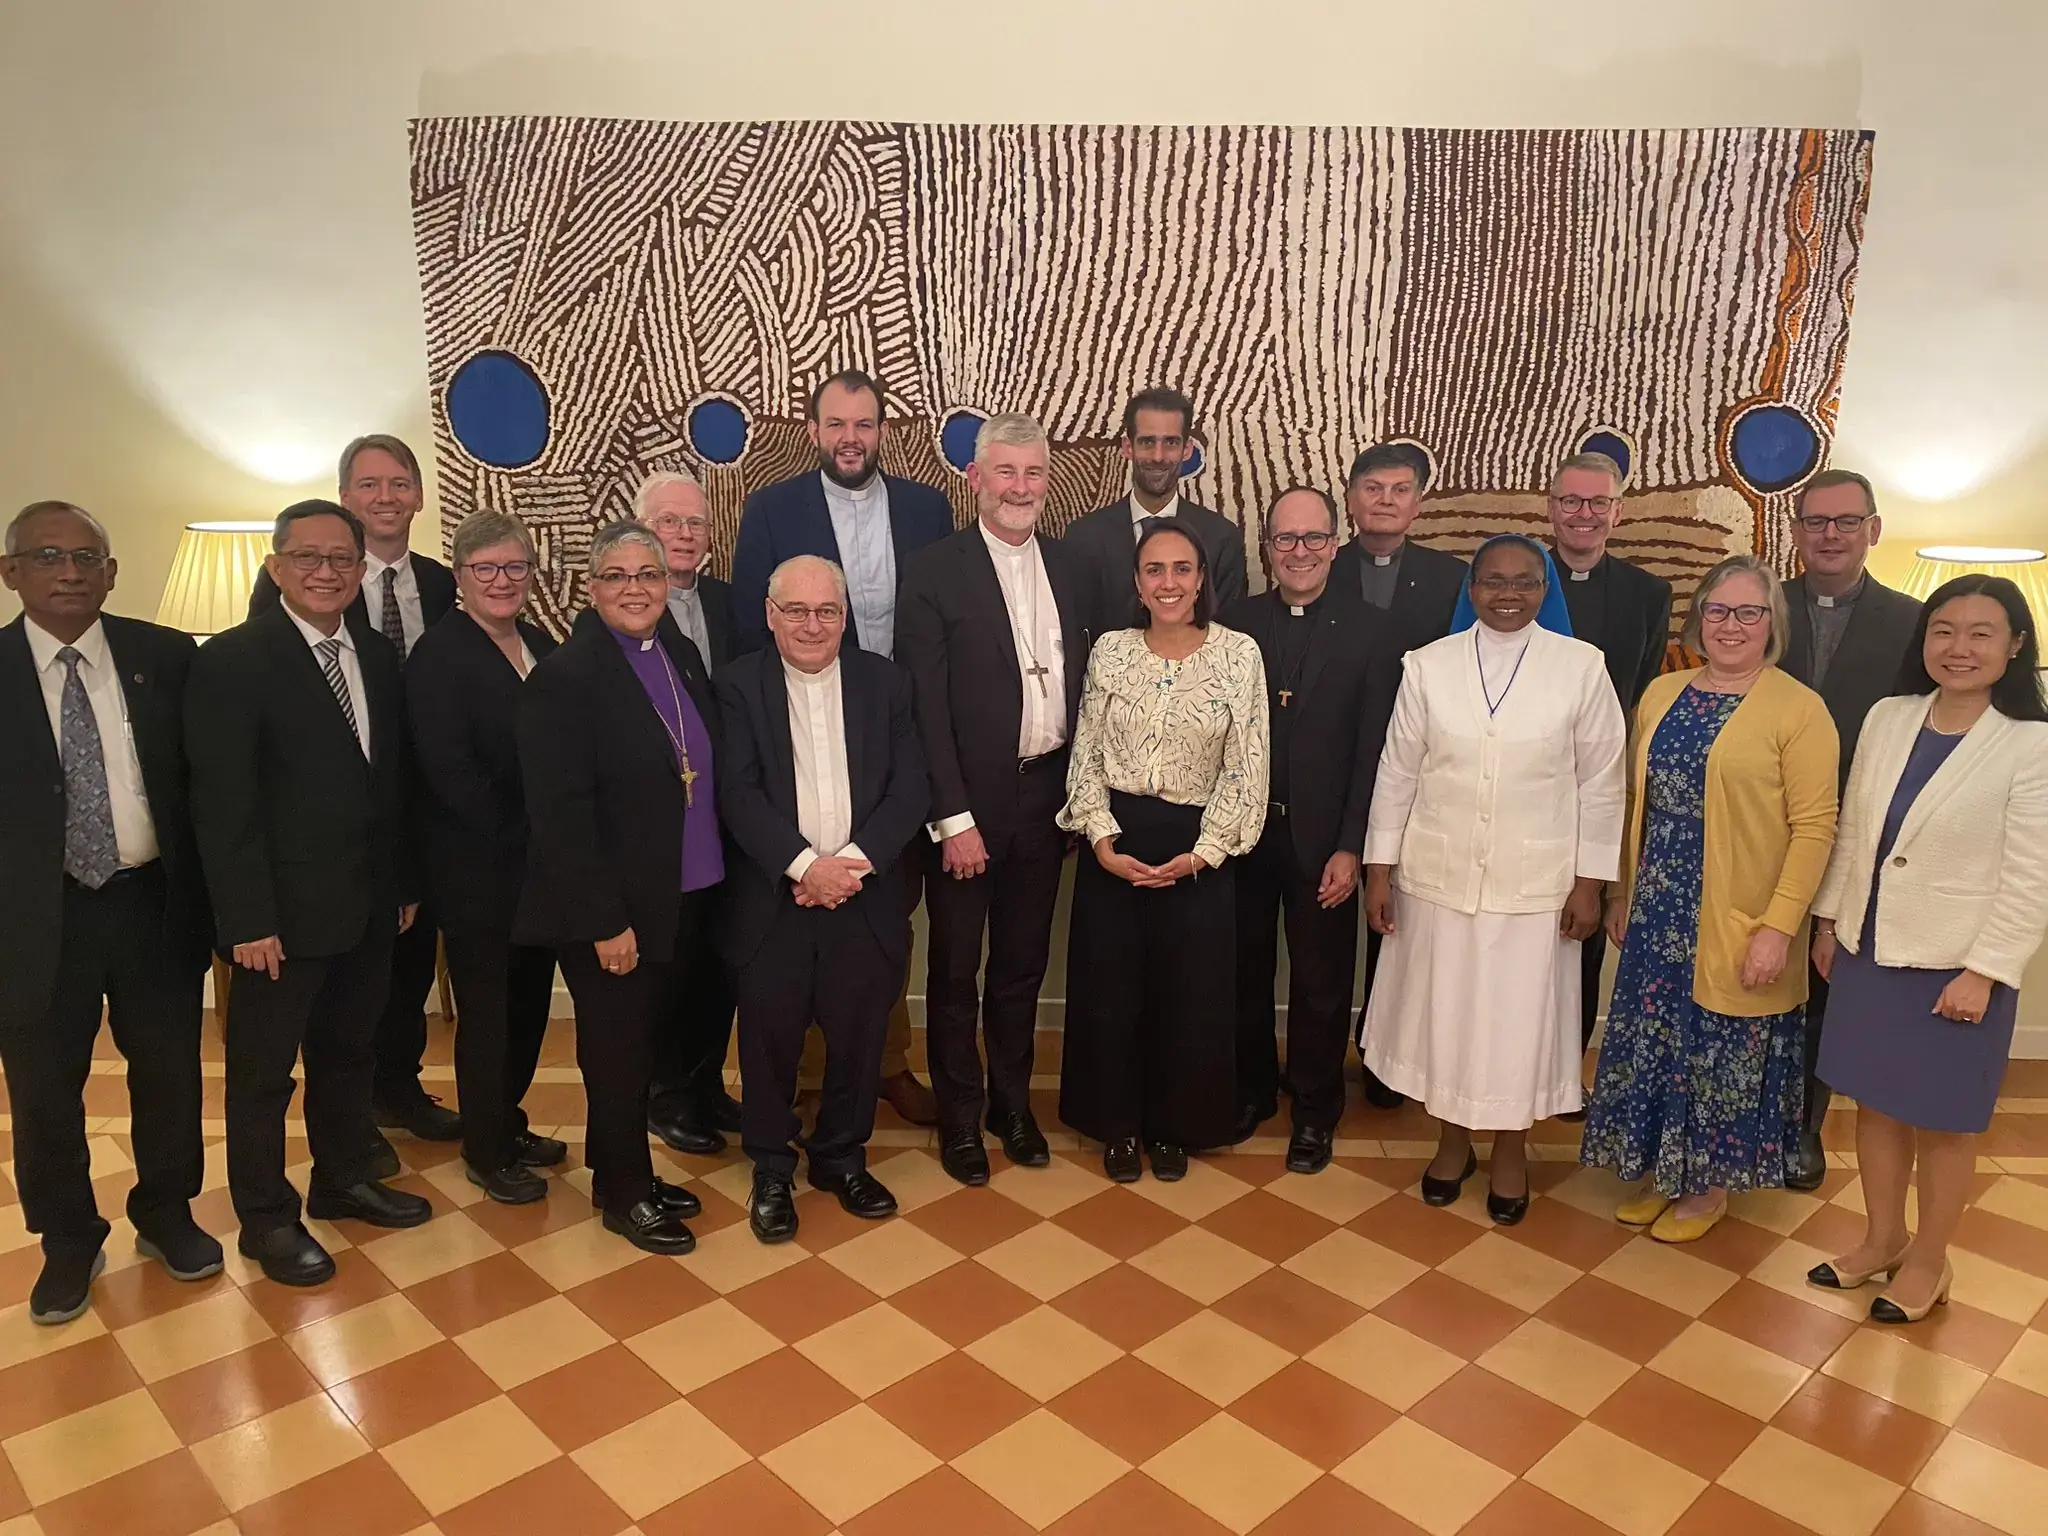 Members of the Methodist-Roman Catholic International Commission were hosted at a reception by Chiara Porro, the Australian Ambassador to the Holy See